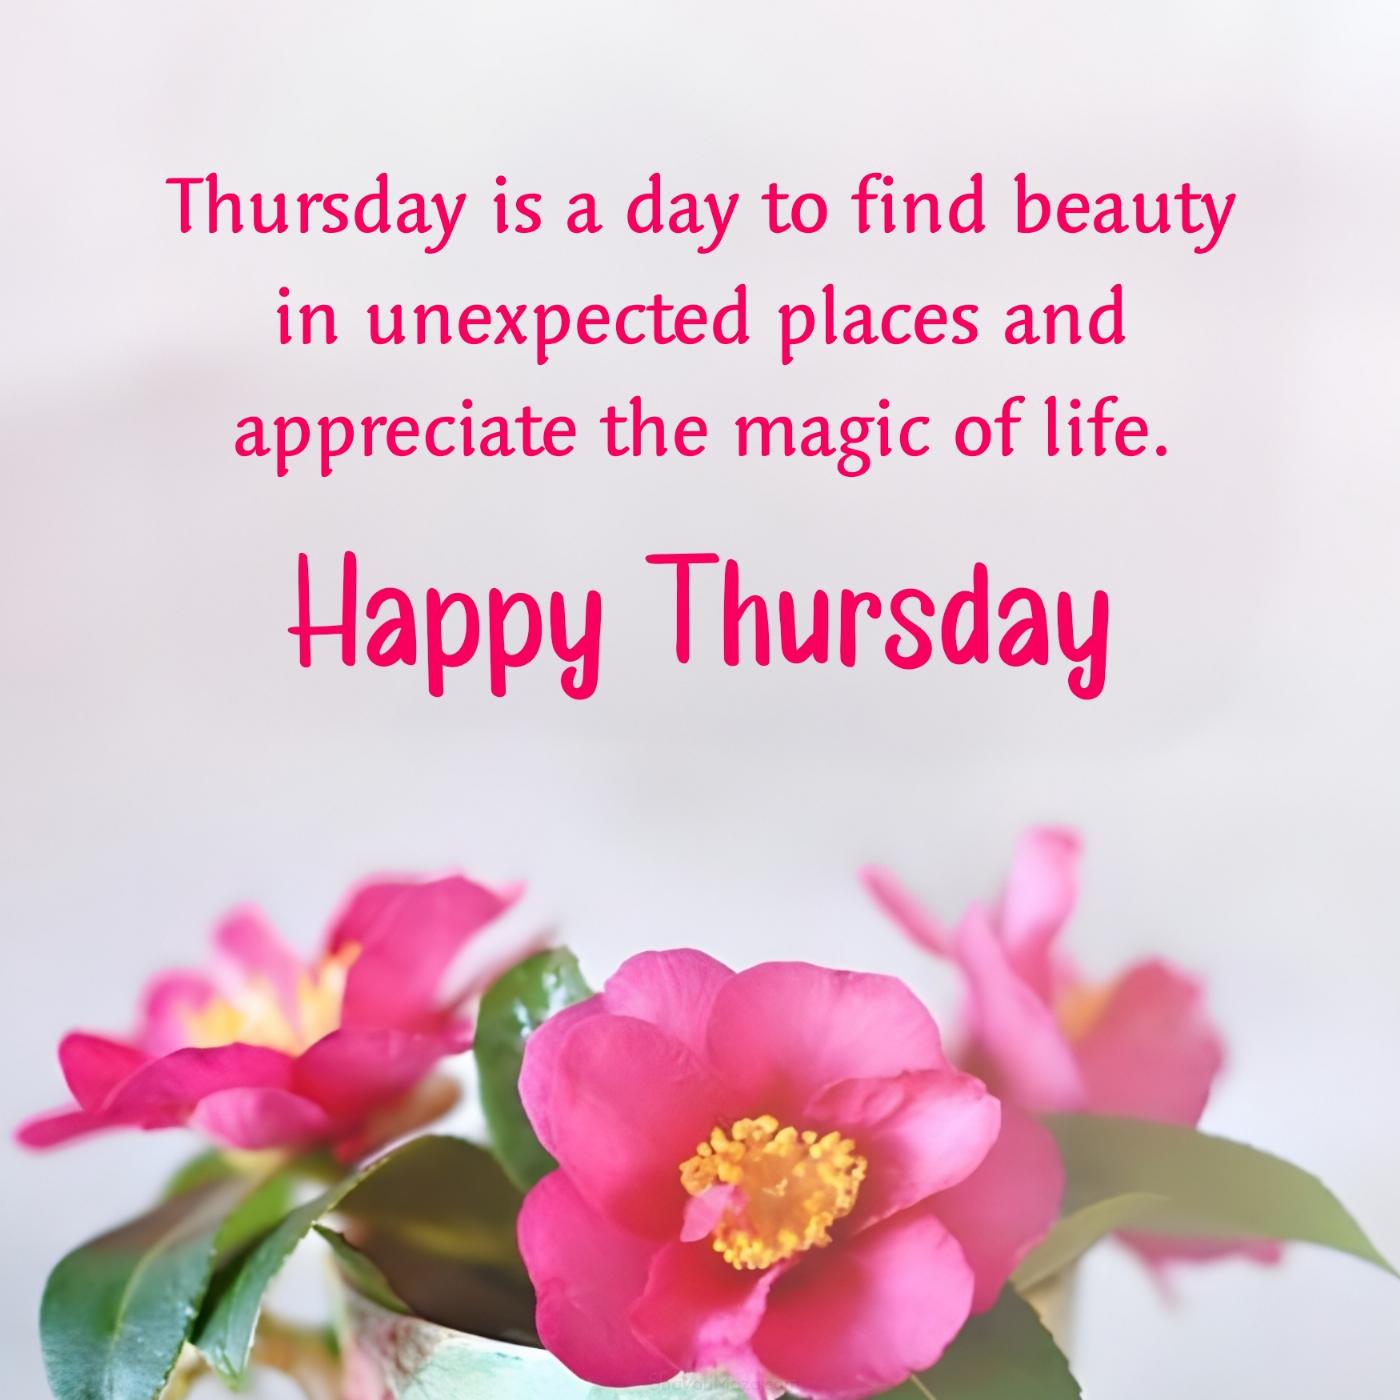 Thursday is a day to find beauty in unexpected places